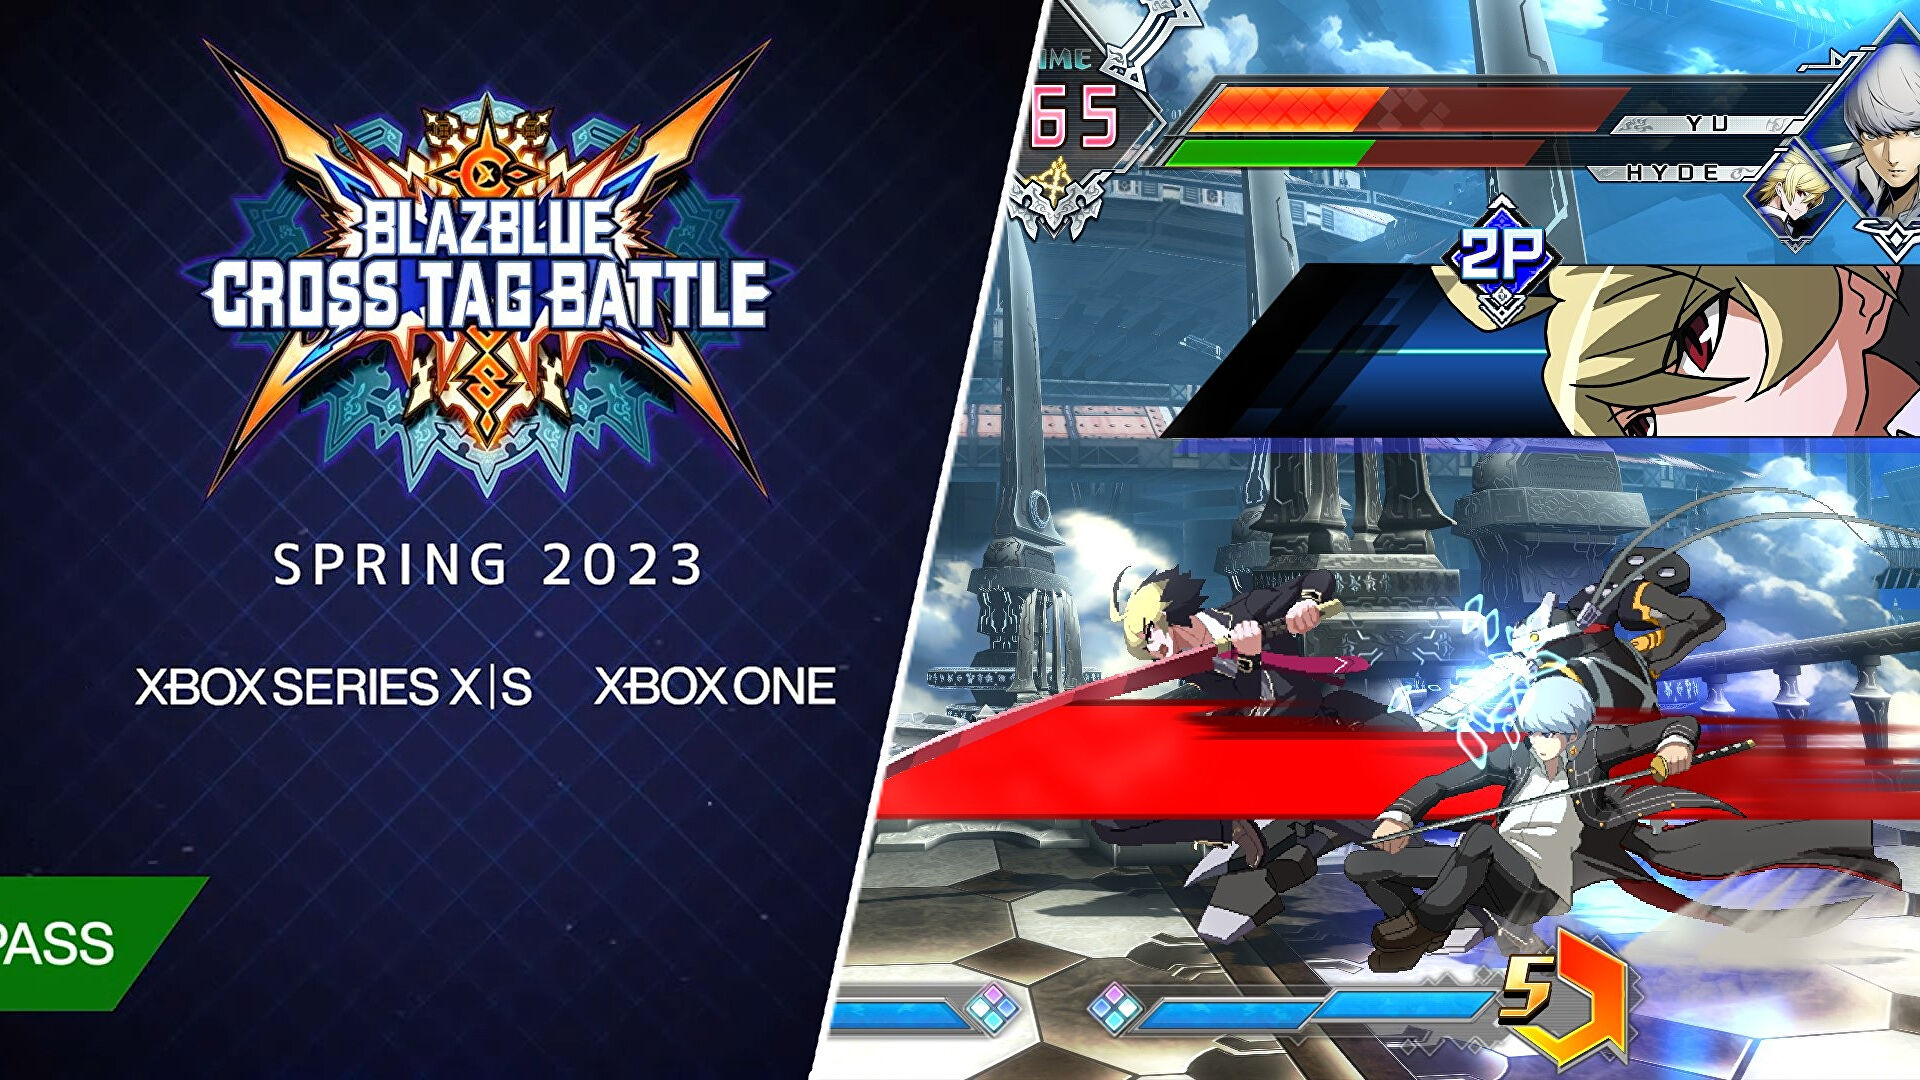 Guilty Gear Strive and Blazblue Cross Tag Battle are finally on Game Pass